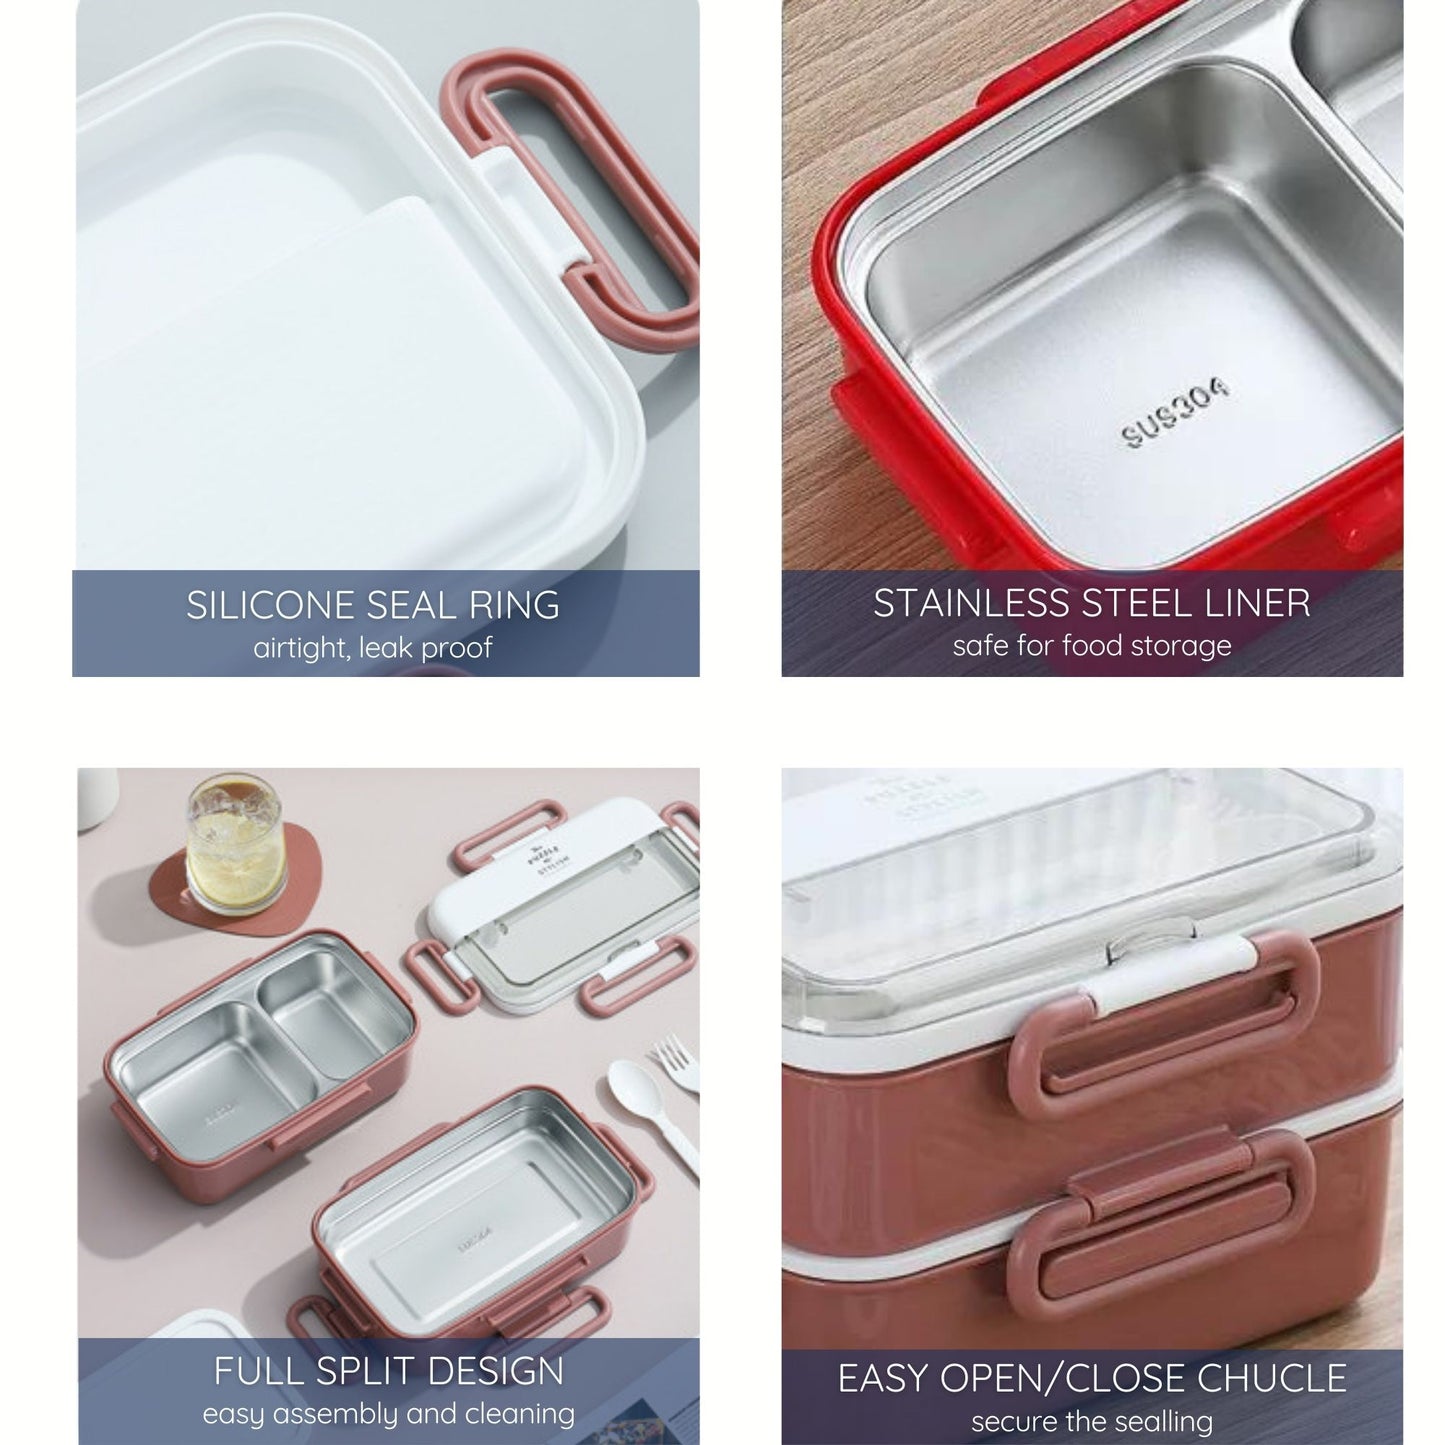 Due-Deck Stainless Steel Lunch Box - Leakproof 3 Compartment 1600 ml